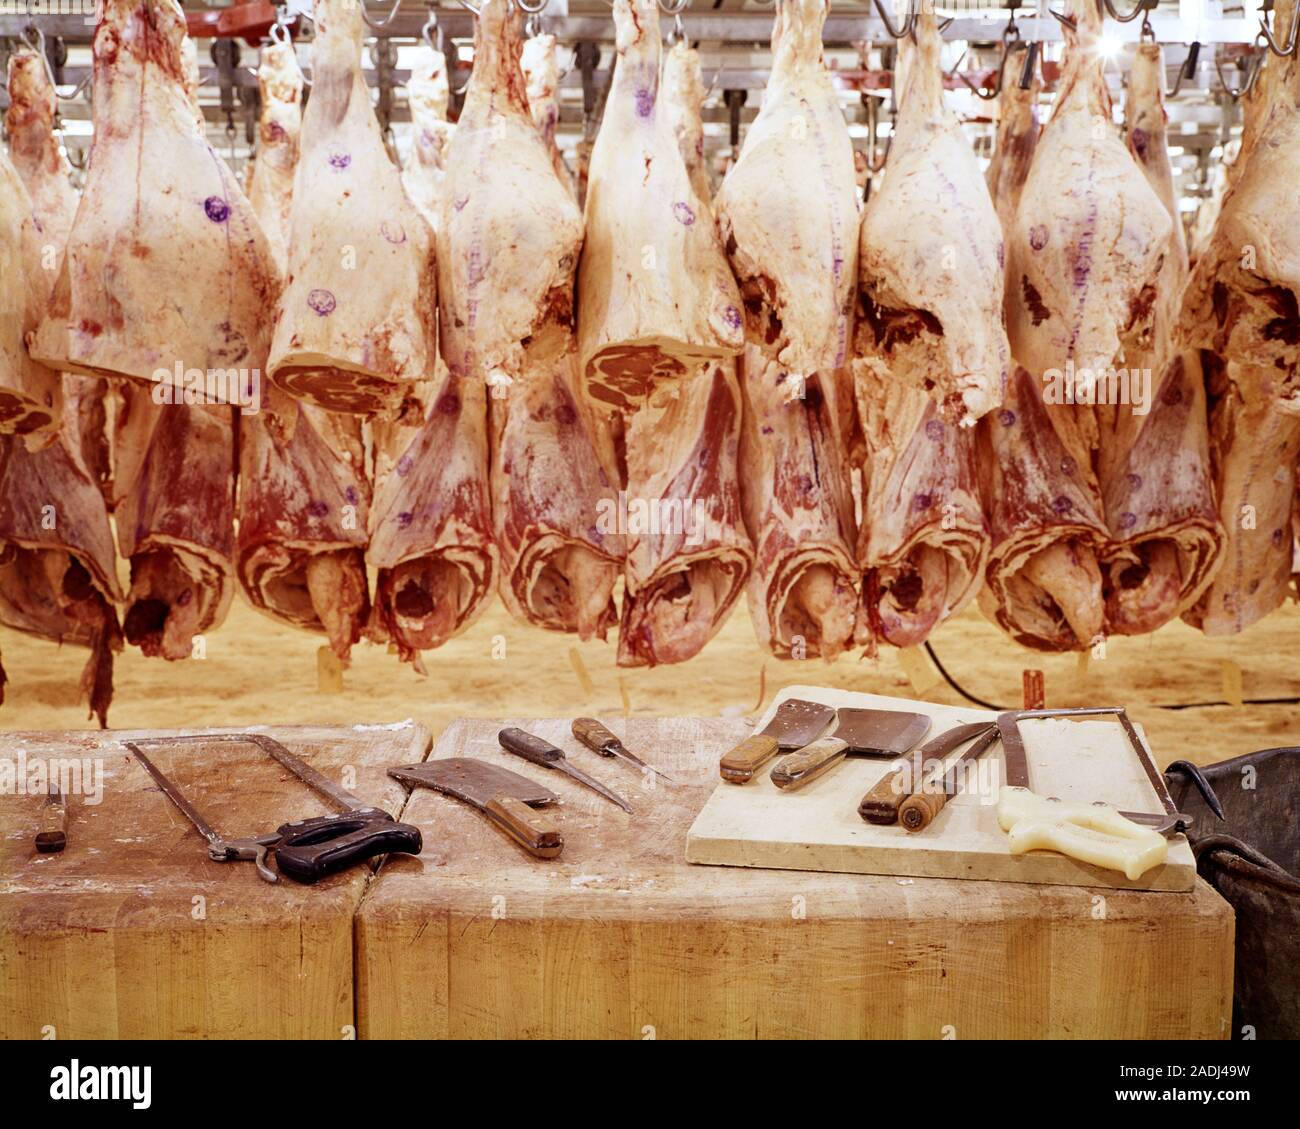 1970s BUTCHER’S TOOL ON CHOPPING BLOCK IN FRONT OF SIDE OF RAW DRESSED BEEF CARCASSES HANGING IN A WAREHOUSE MEAT COOLER - kf6221 HAR001 HARS FOOD PROCESSING HAR001 MEATS OLD FASHIONED WHOLESALE Stock Photo